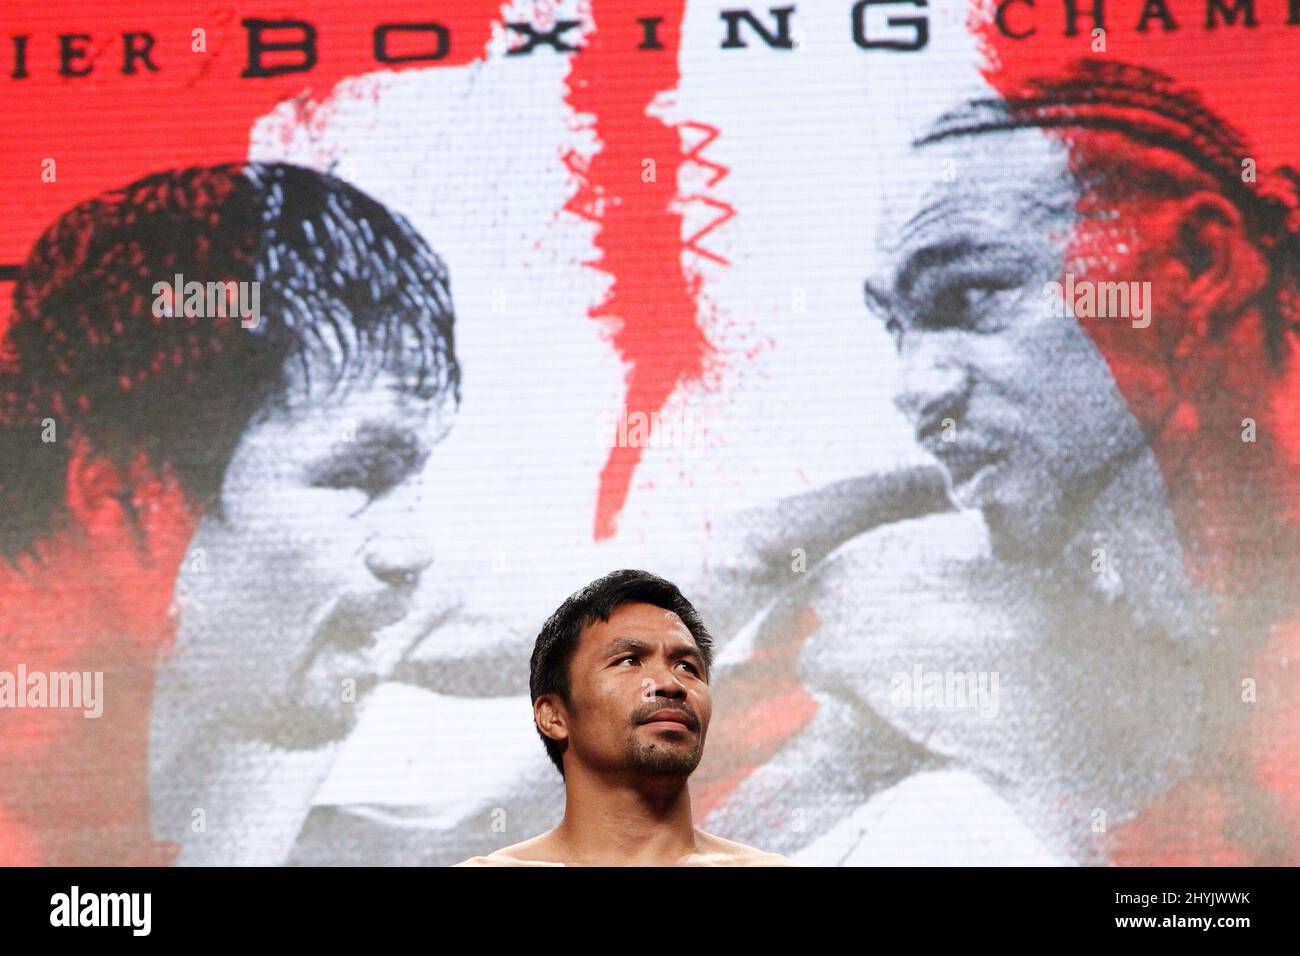 Manny Pacquiao on stage during the weigh in for the Manny Pacquiao vs Keith Thurman WBA World Welterweight Championship fight at the MGM Grand Garden Arena on July 19, 2019 in Las Vegas, NV. Stock Photo